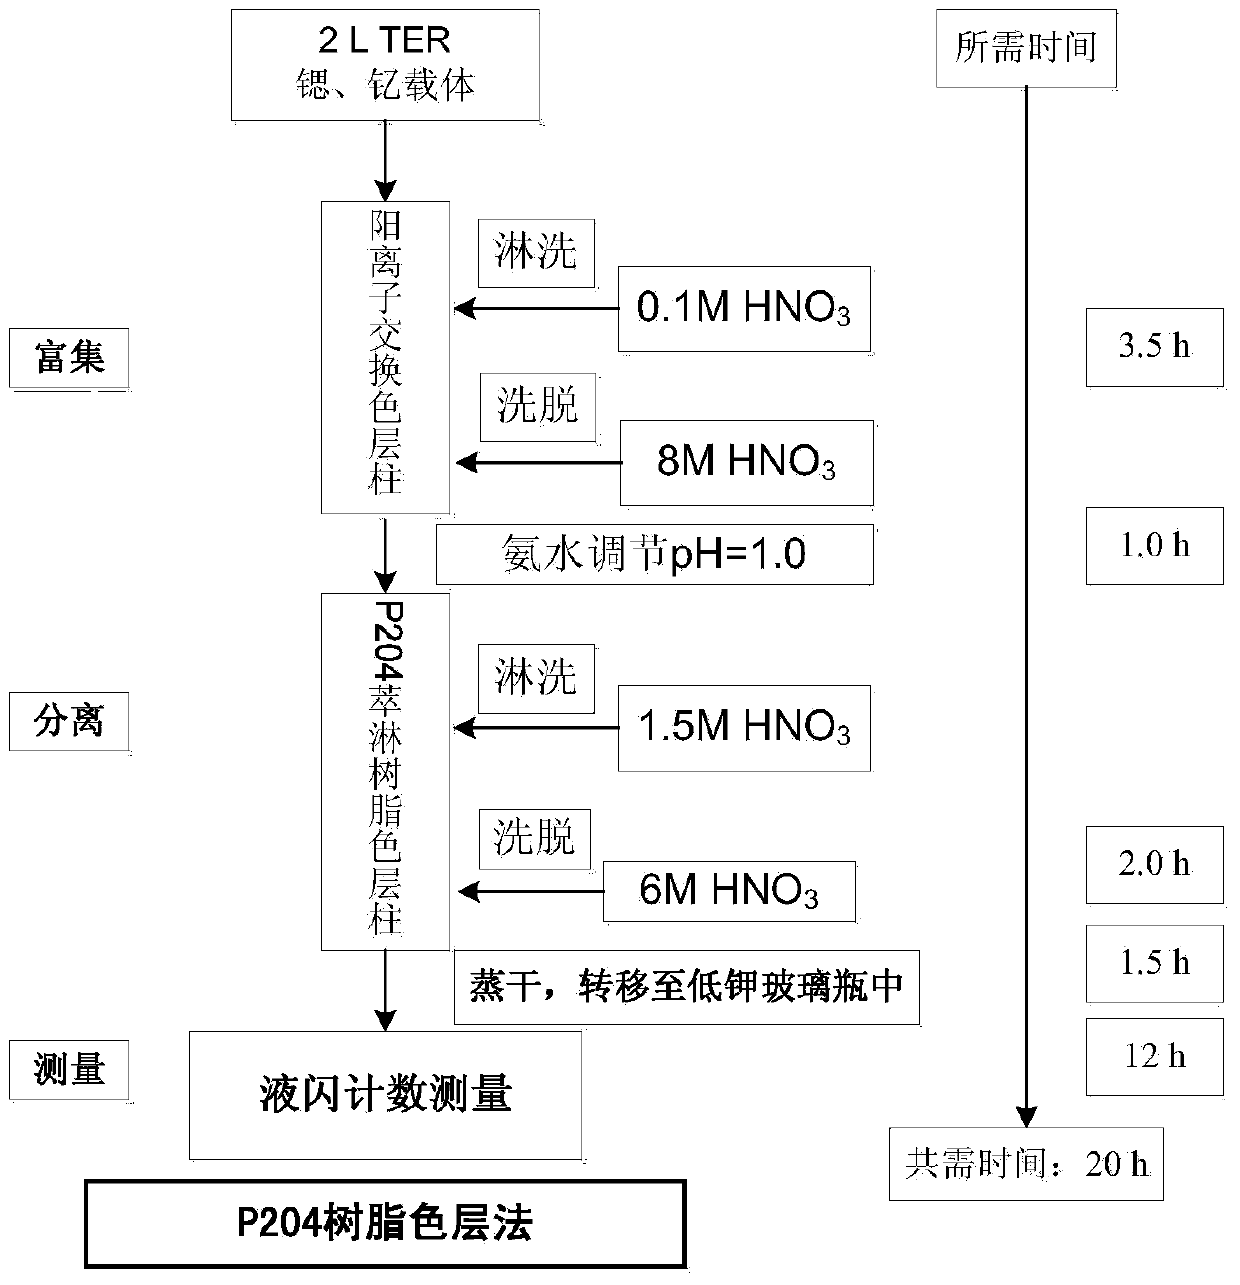 Method for rapidly analyzing strontium-90 in liquid state efflux of nuclear power plant